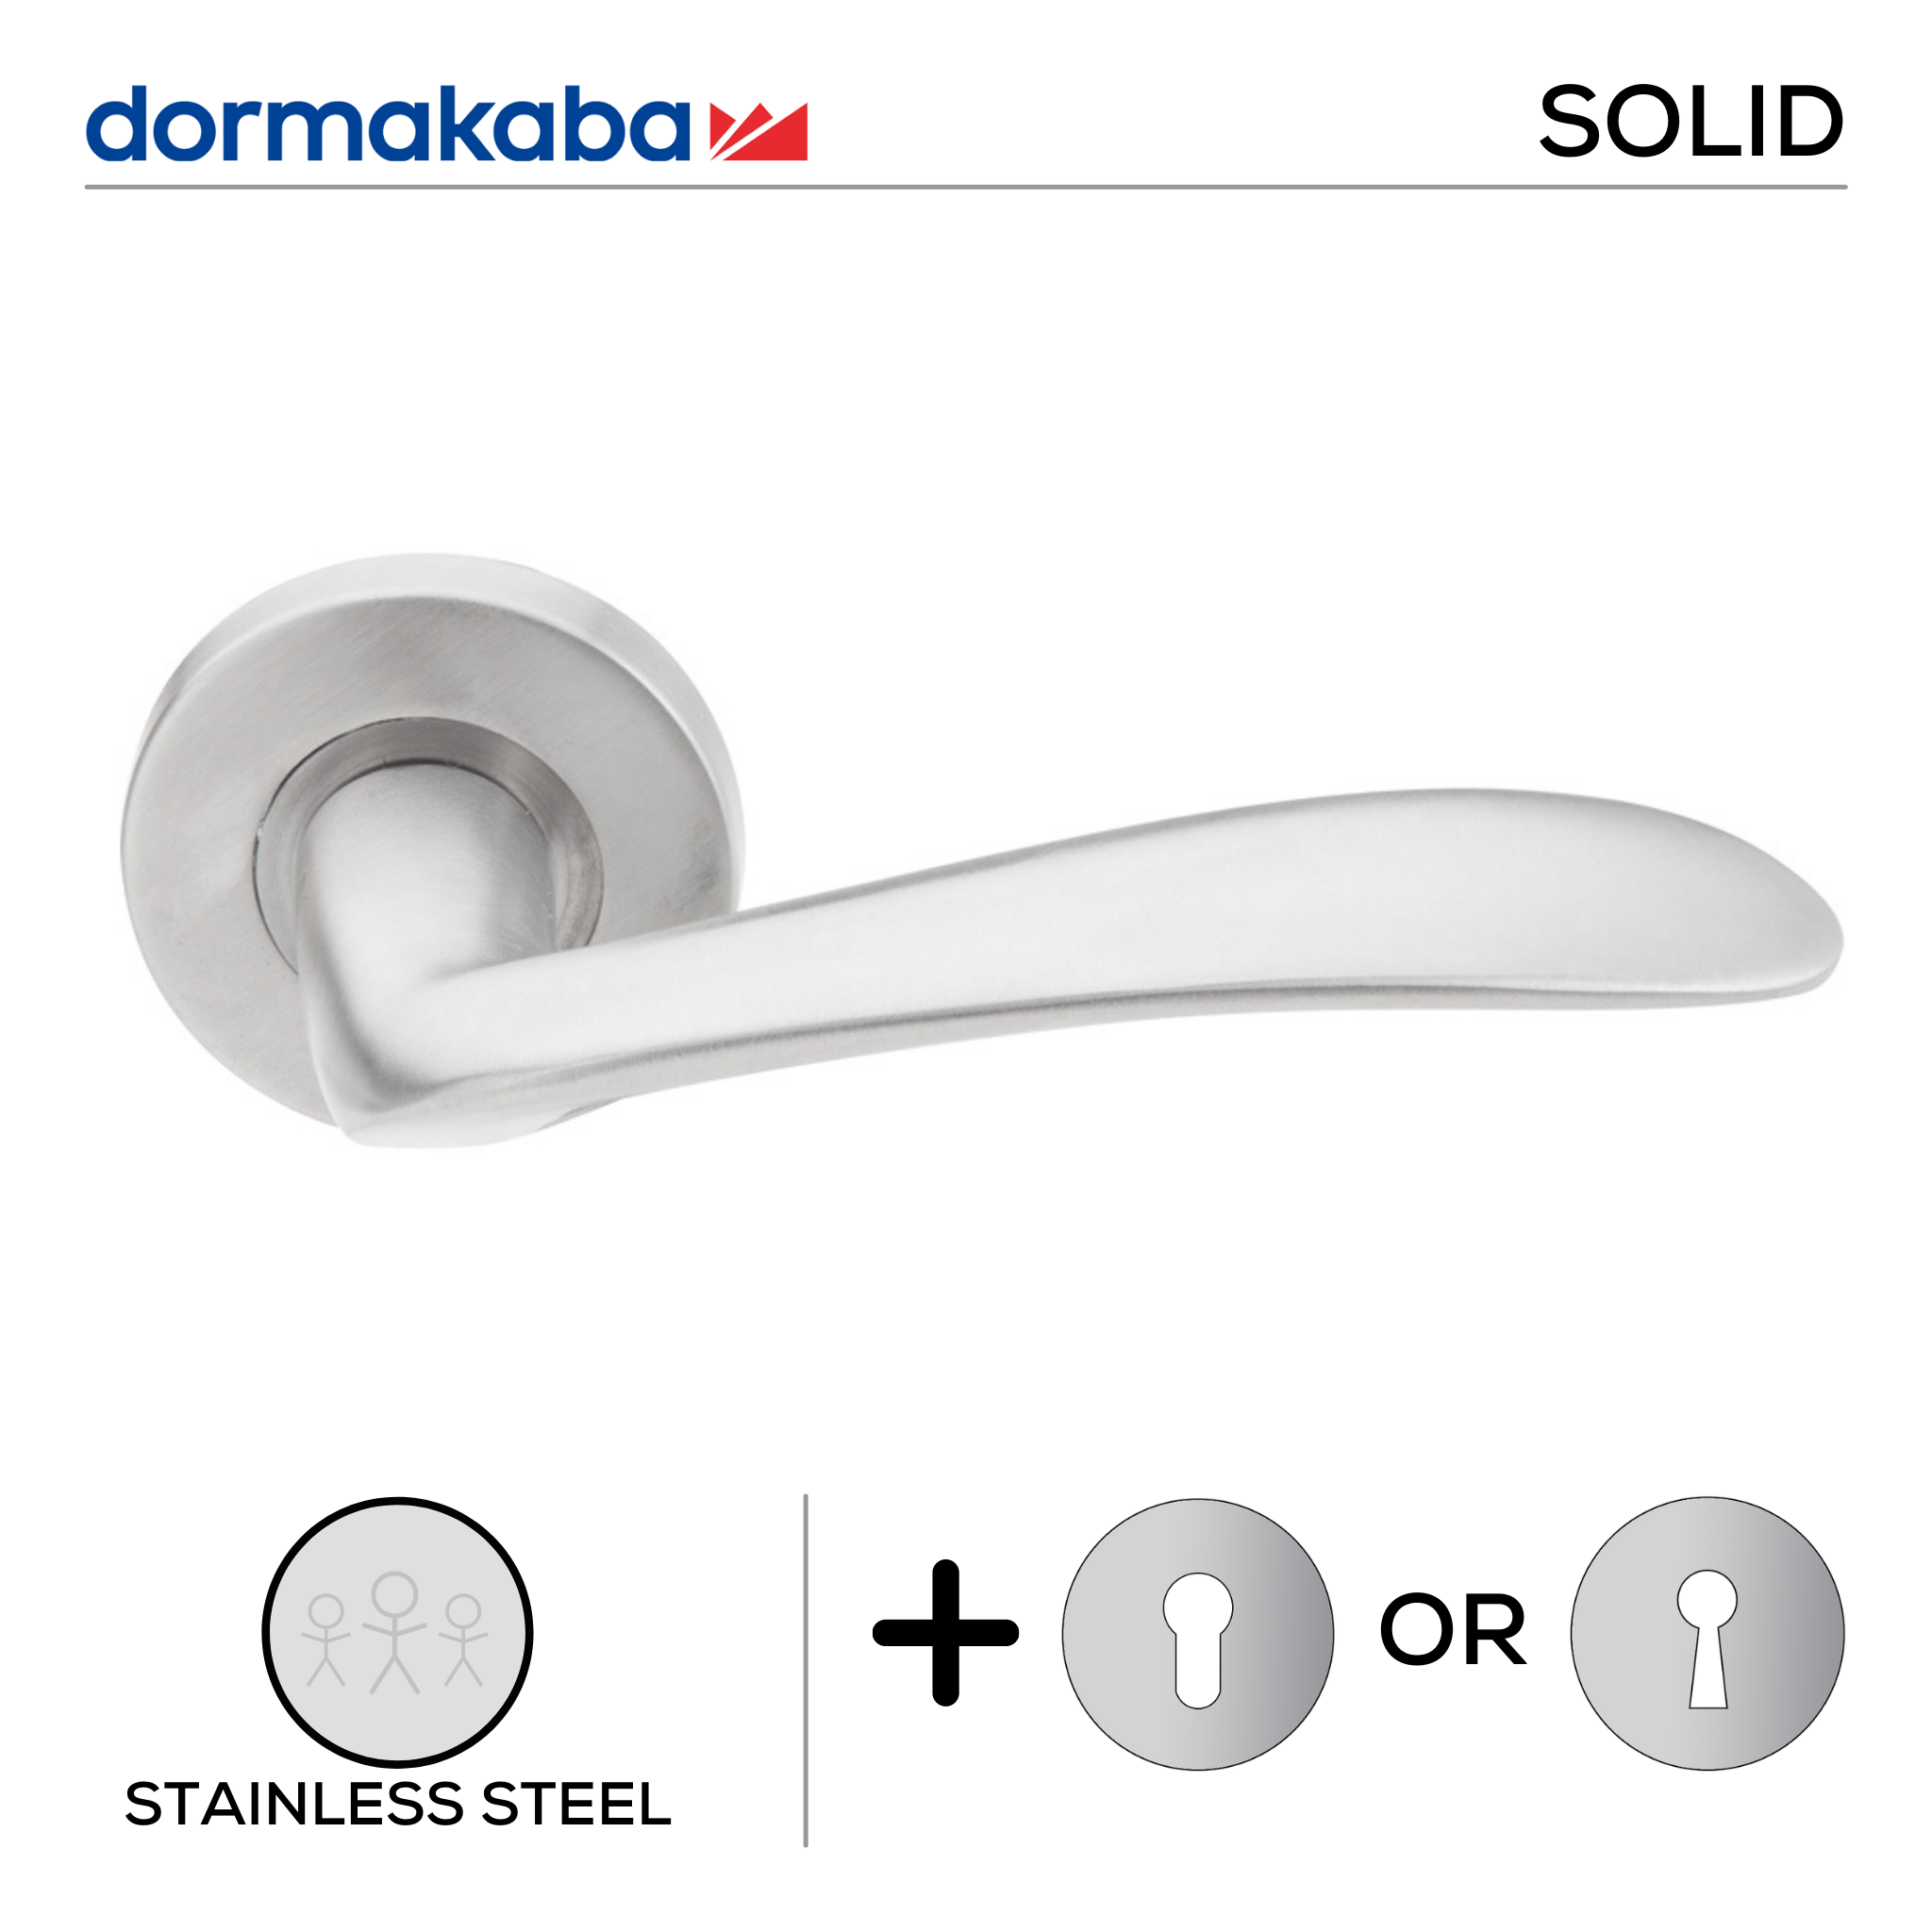 SH 810, Lever Handles, Solid, On Round Rose, With Escutcheons, 131mm (l), Stainless Steel, DORMAKABA